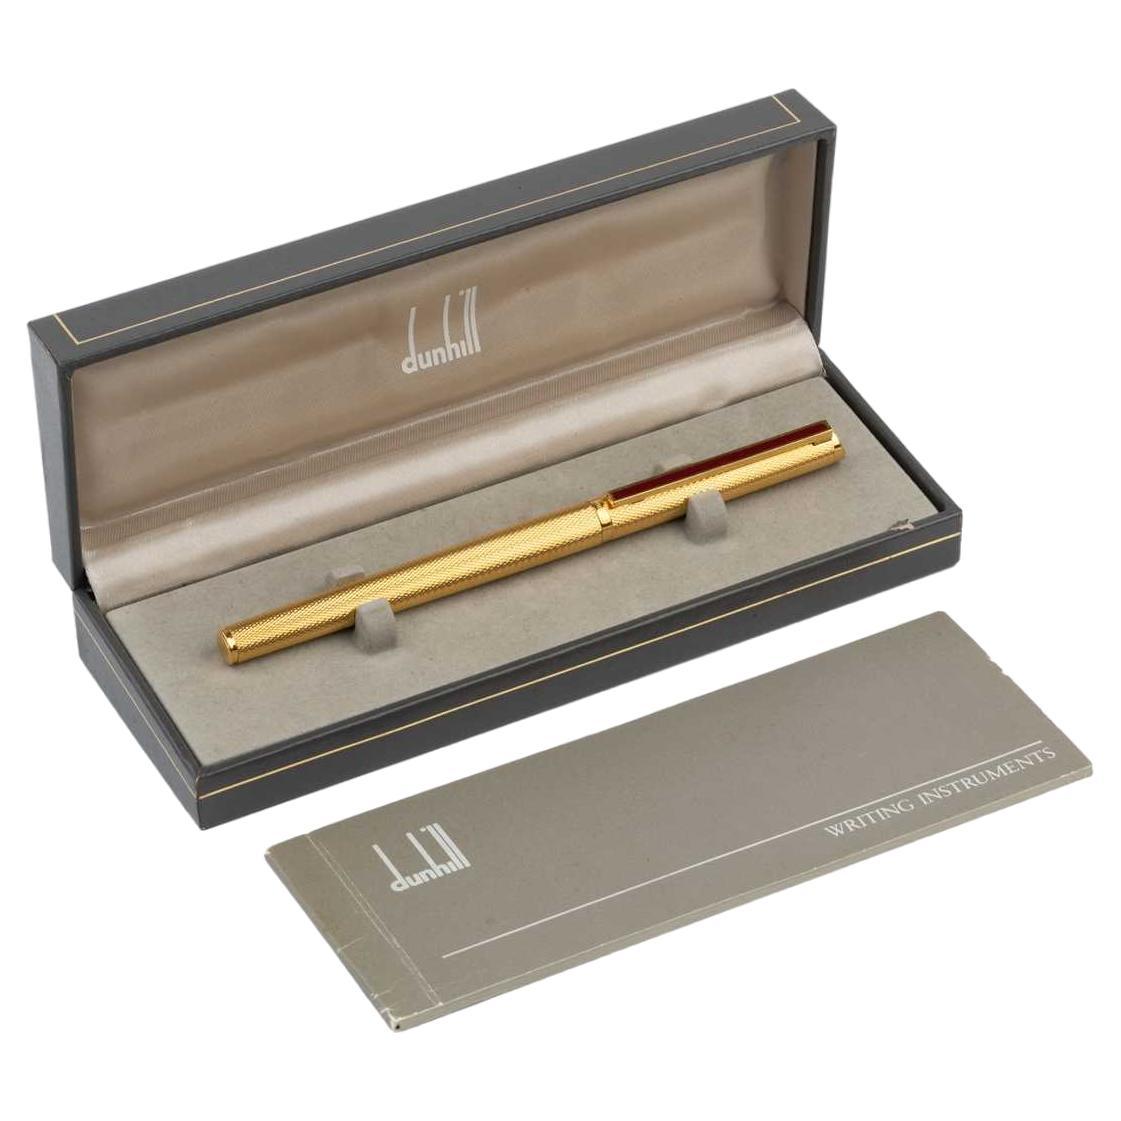 Dunhill Gemline Gold Plated Boxed Fountain Pen With Engine Turned Decoration